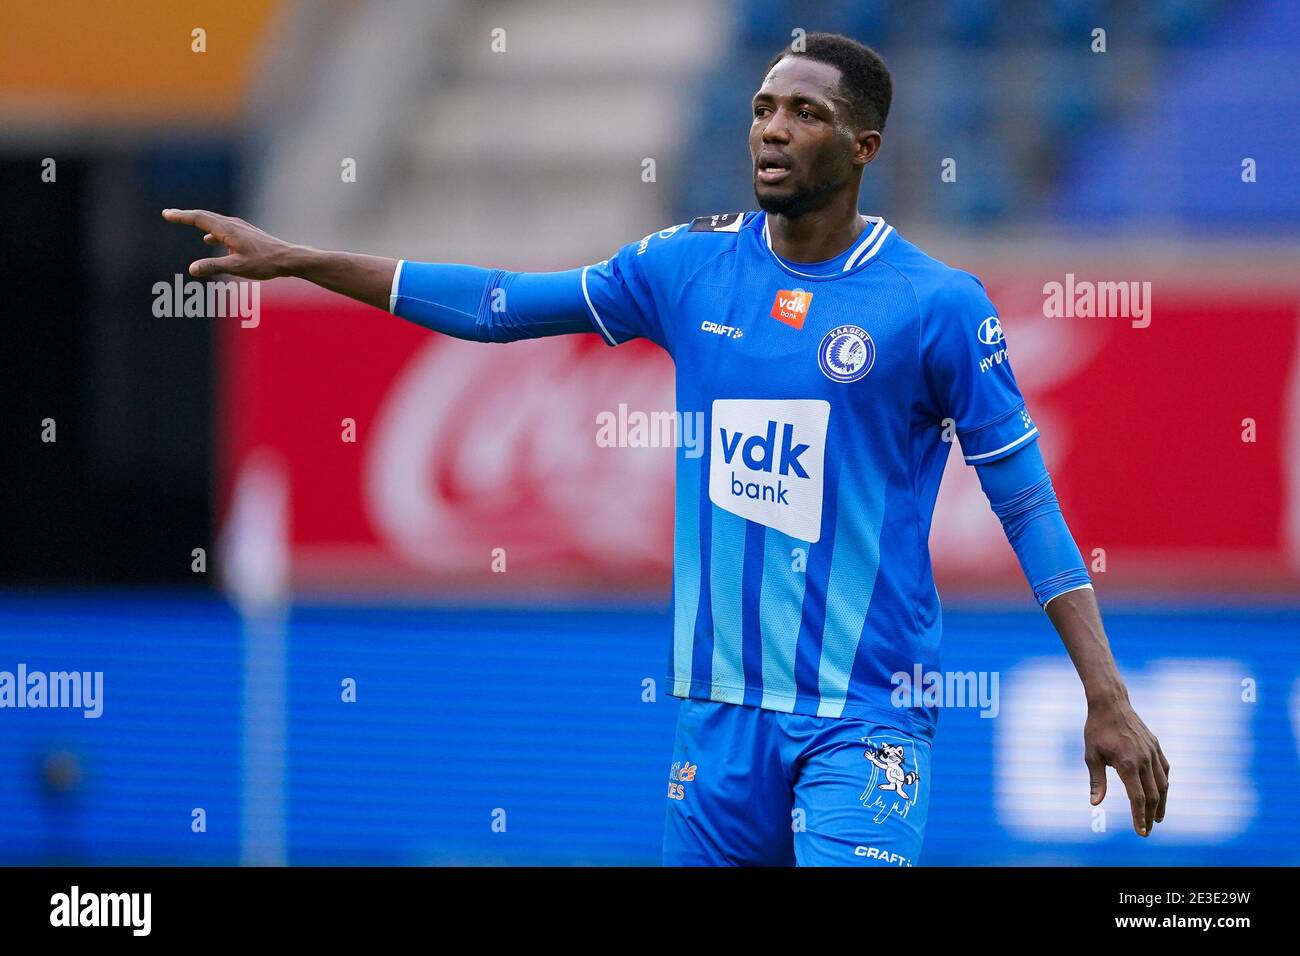 Ghent Belgium January 17 Sulayman Marreh Of Kaa Gent During The Pro League Match Between Kaa Gent And Royal Antwerp Fc At Ghelamco Arena On Januar Stock Photo Alamy